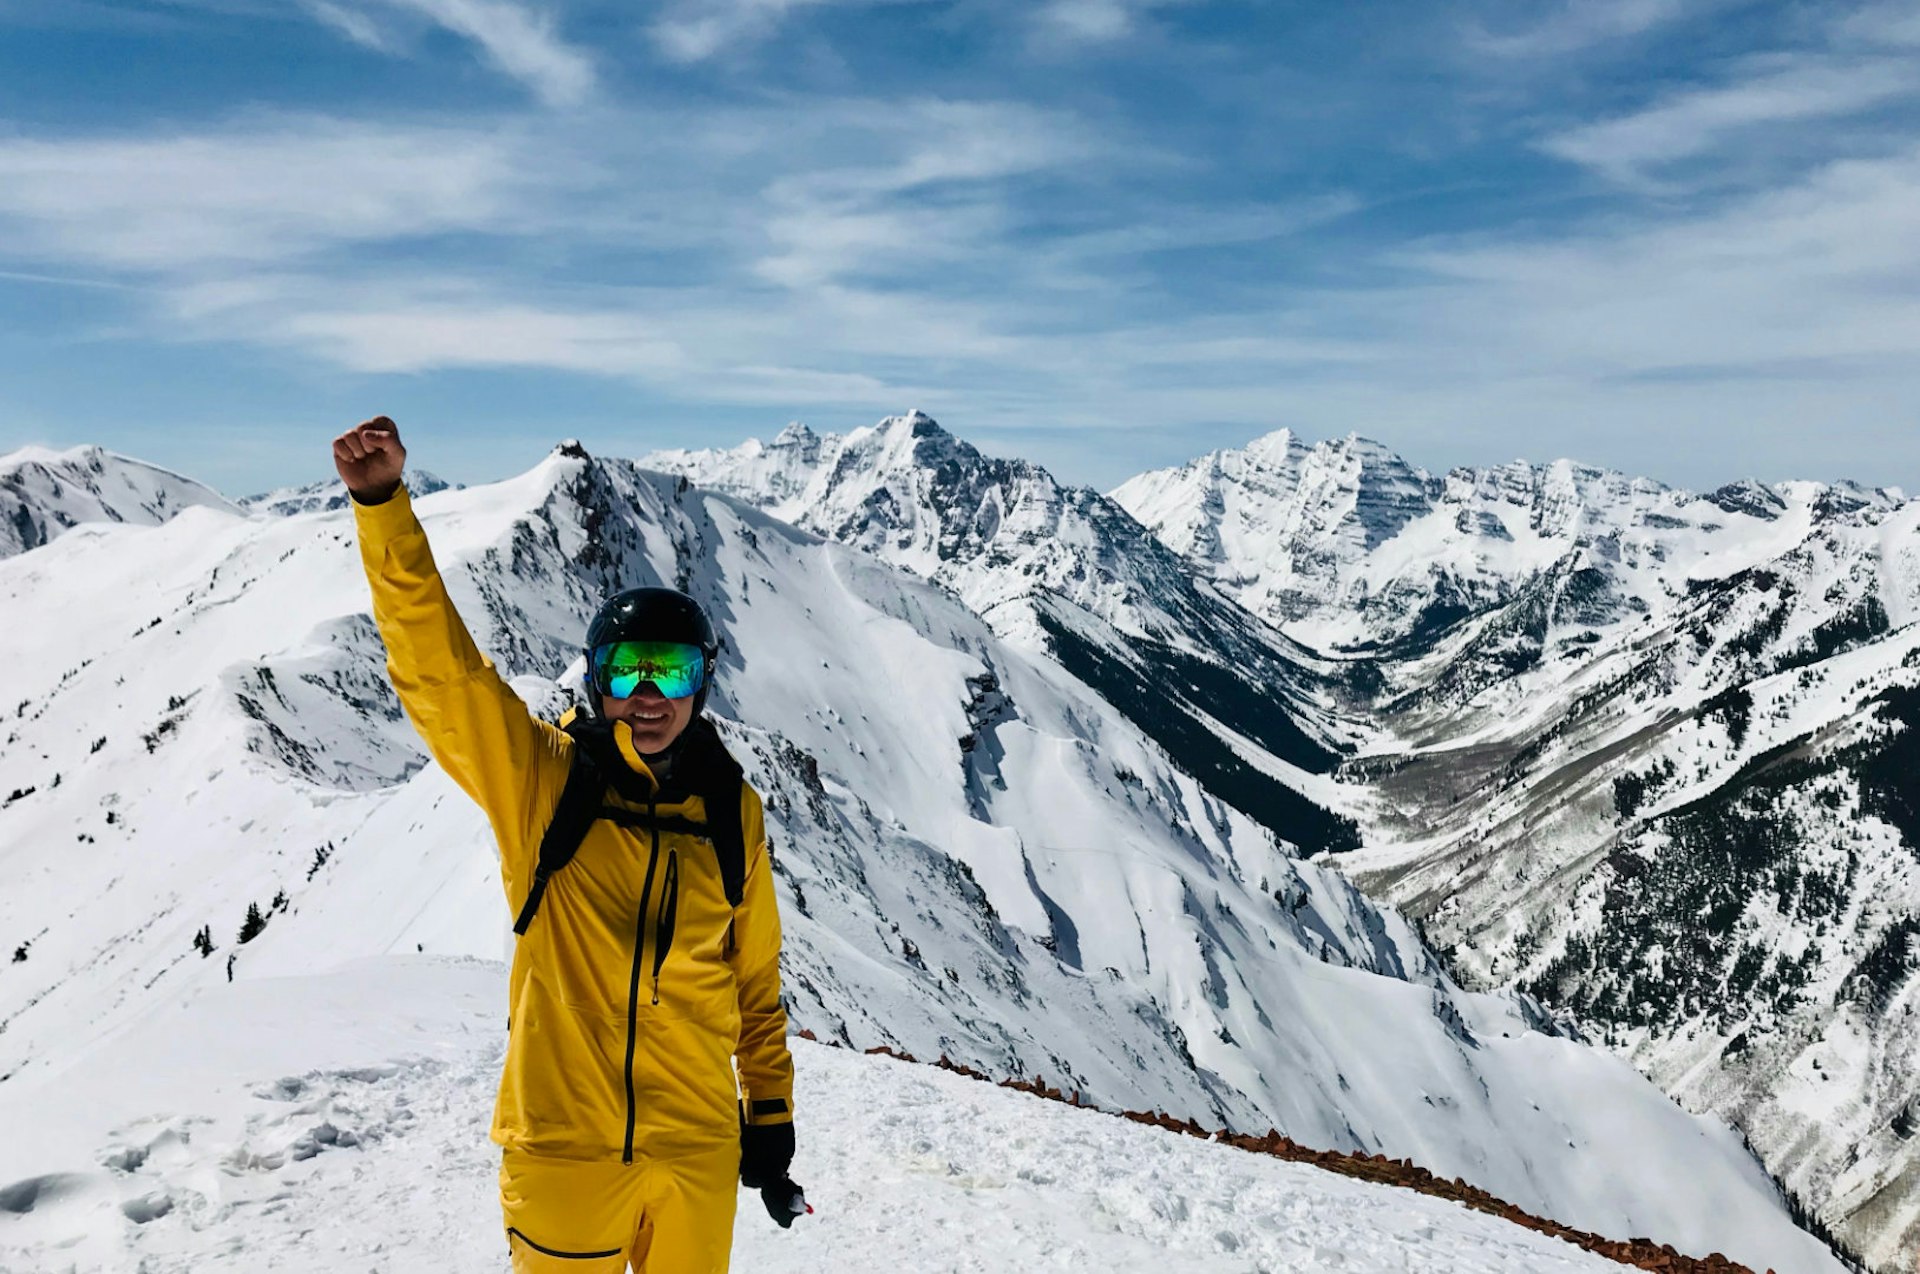 A man stands in front of massifs in Aspen, Colorado wearing the bright yellow waterproof FutureLight pants and jacket, along with goggles, a helmet, and backpack. His right arm is raised in the air with a celebratory fist and he holds his gloves in his left hand by his side.